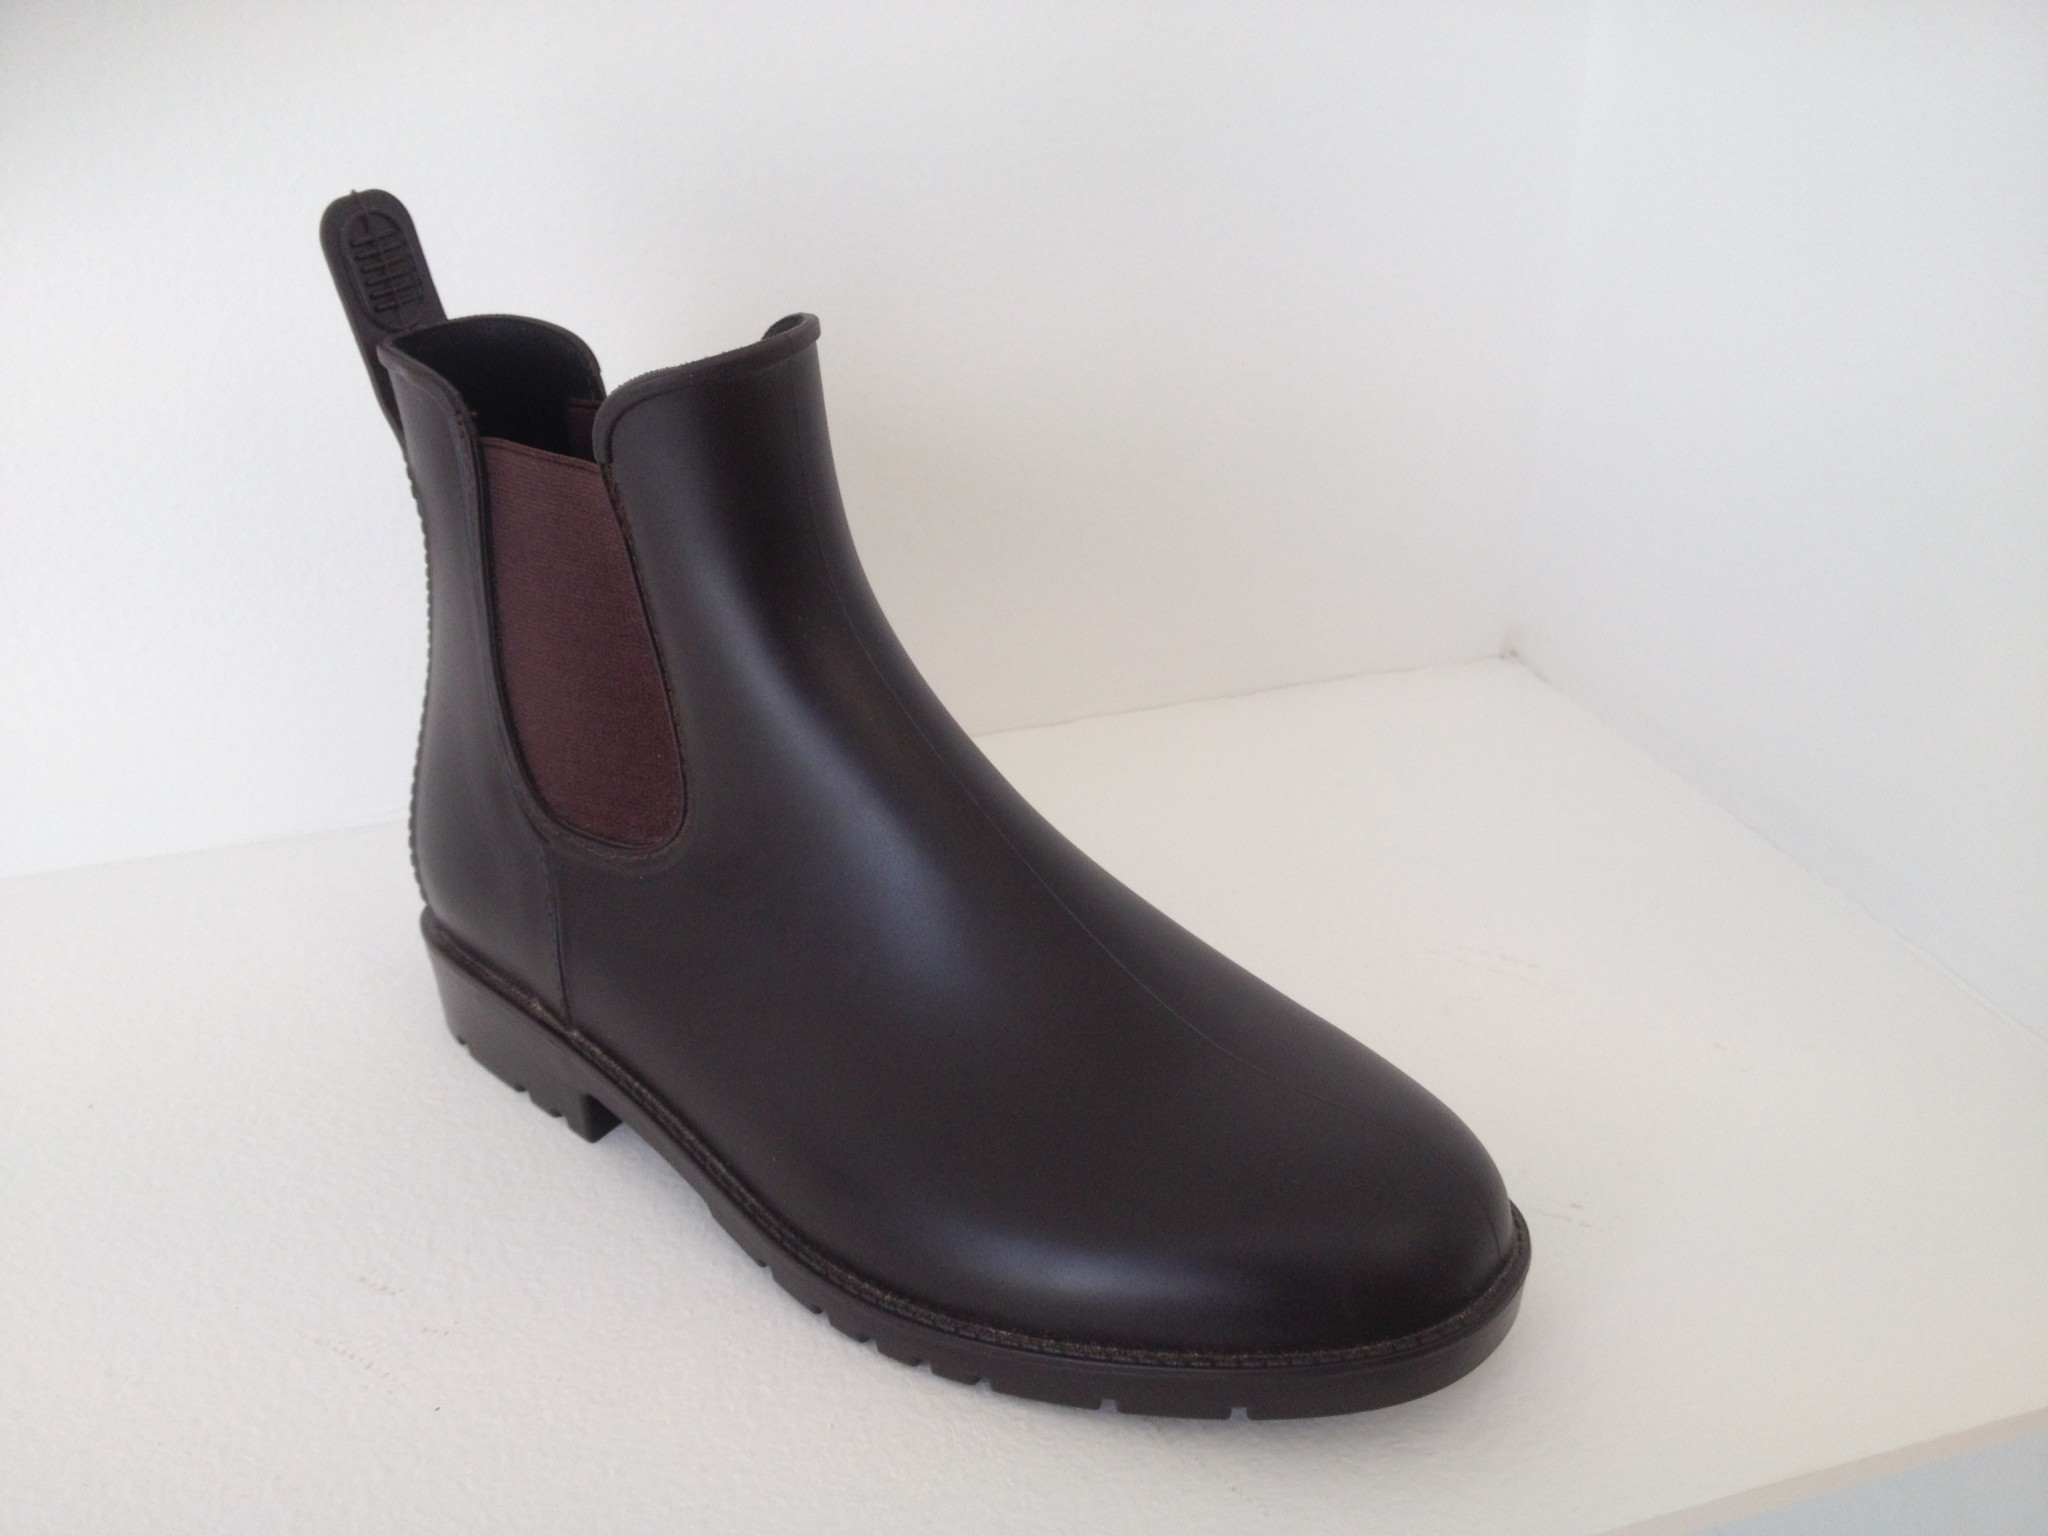 leather gumboots